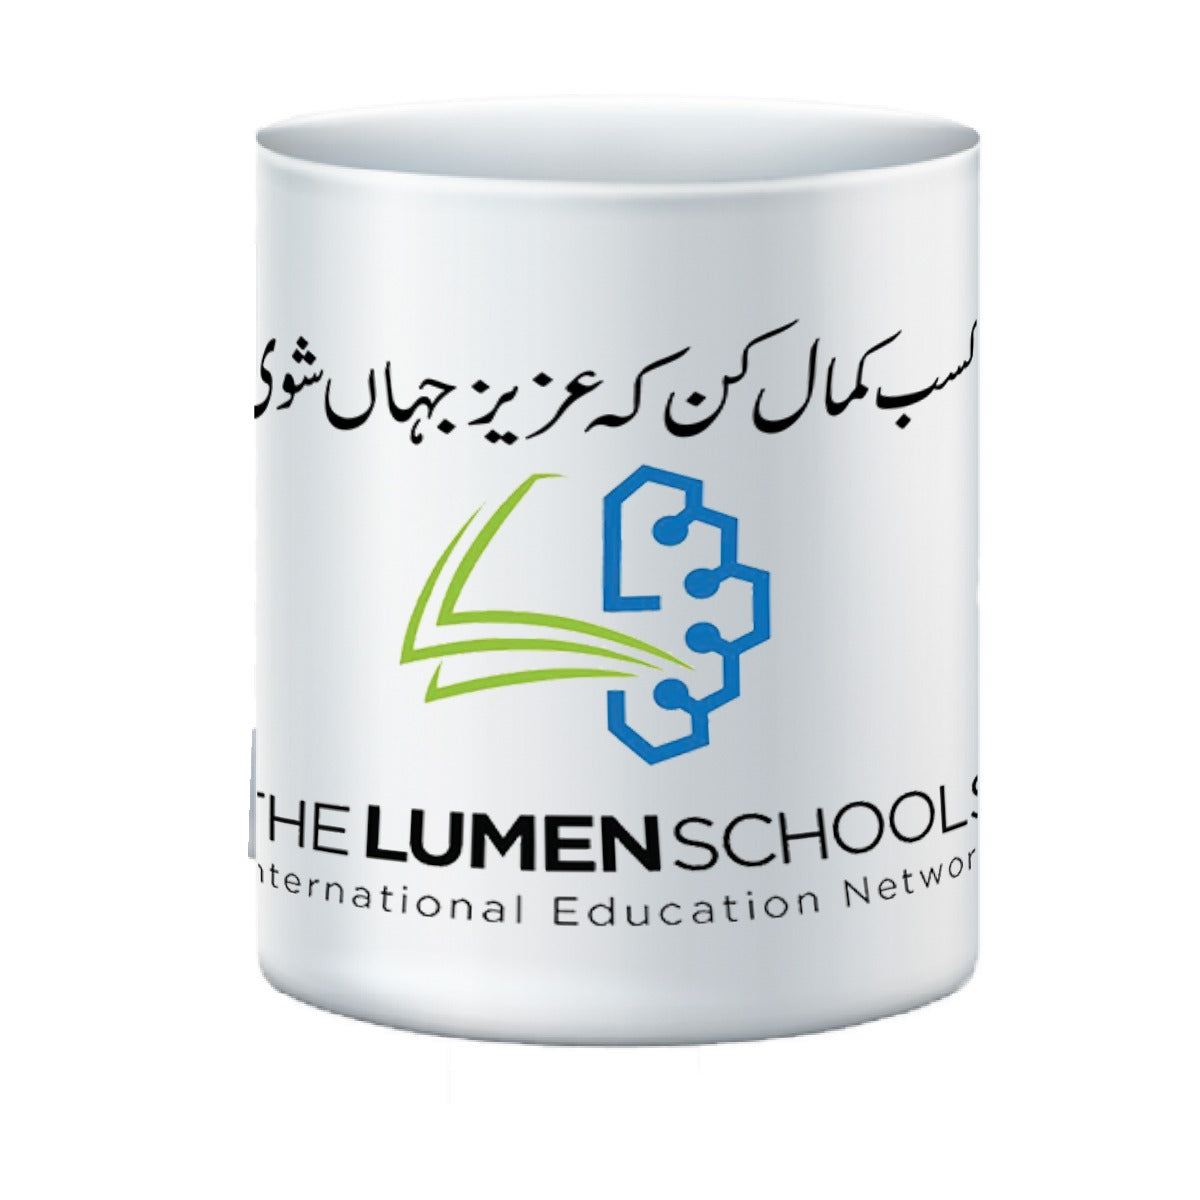 Customized Mugs for Schools: Choose Your Own Design